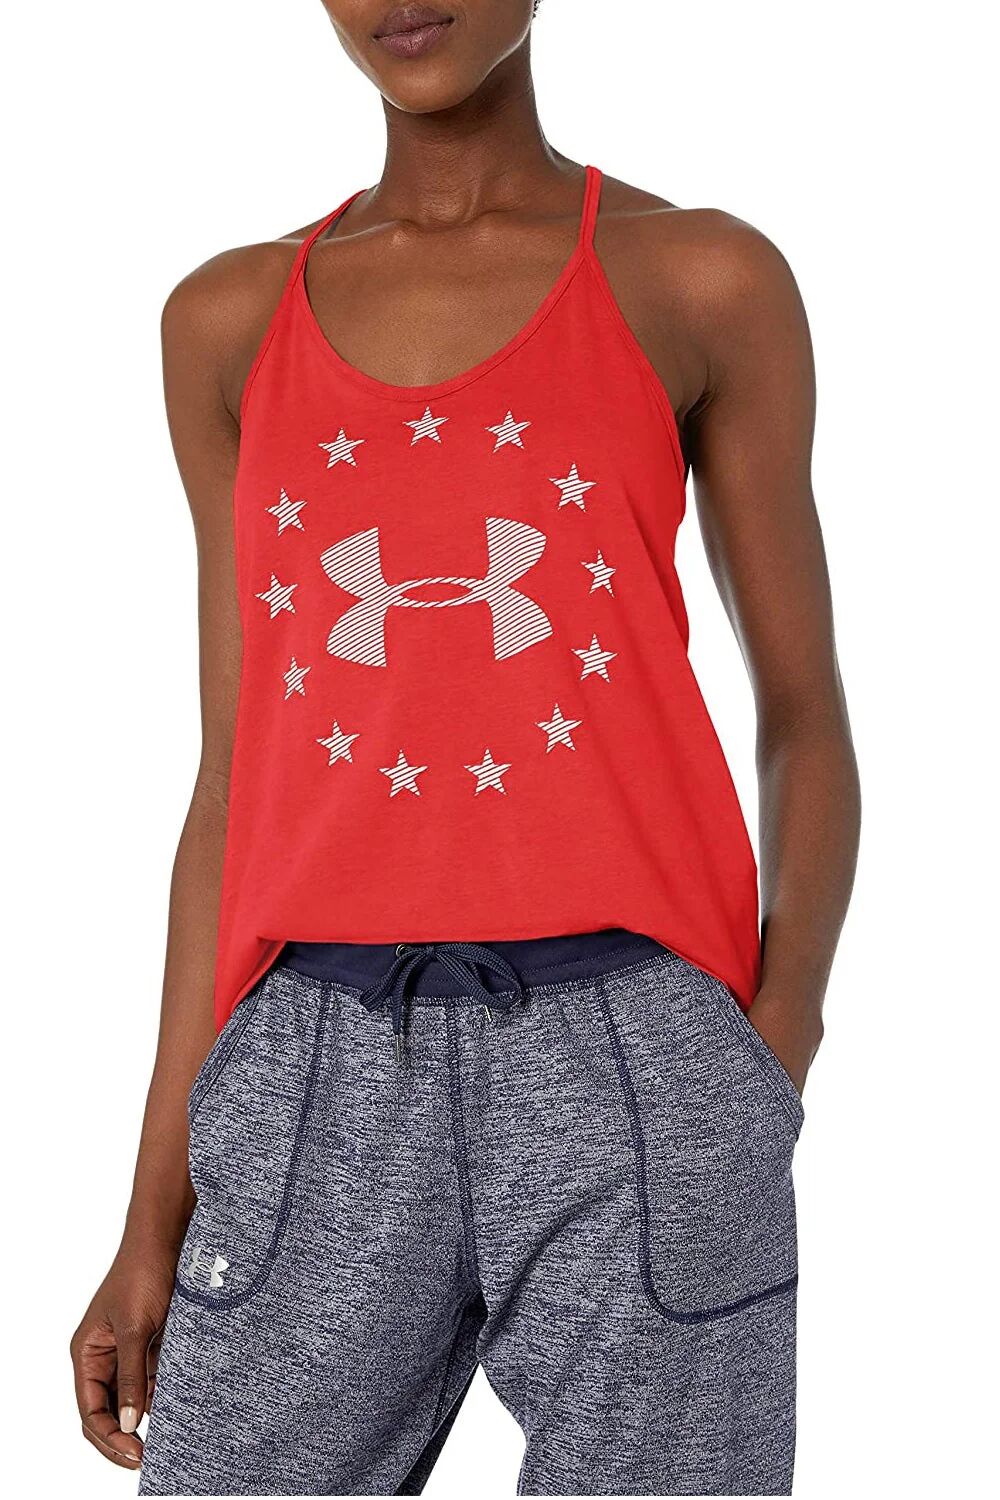 Under Armour Women's Freedom Tank Top Red Size XL